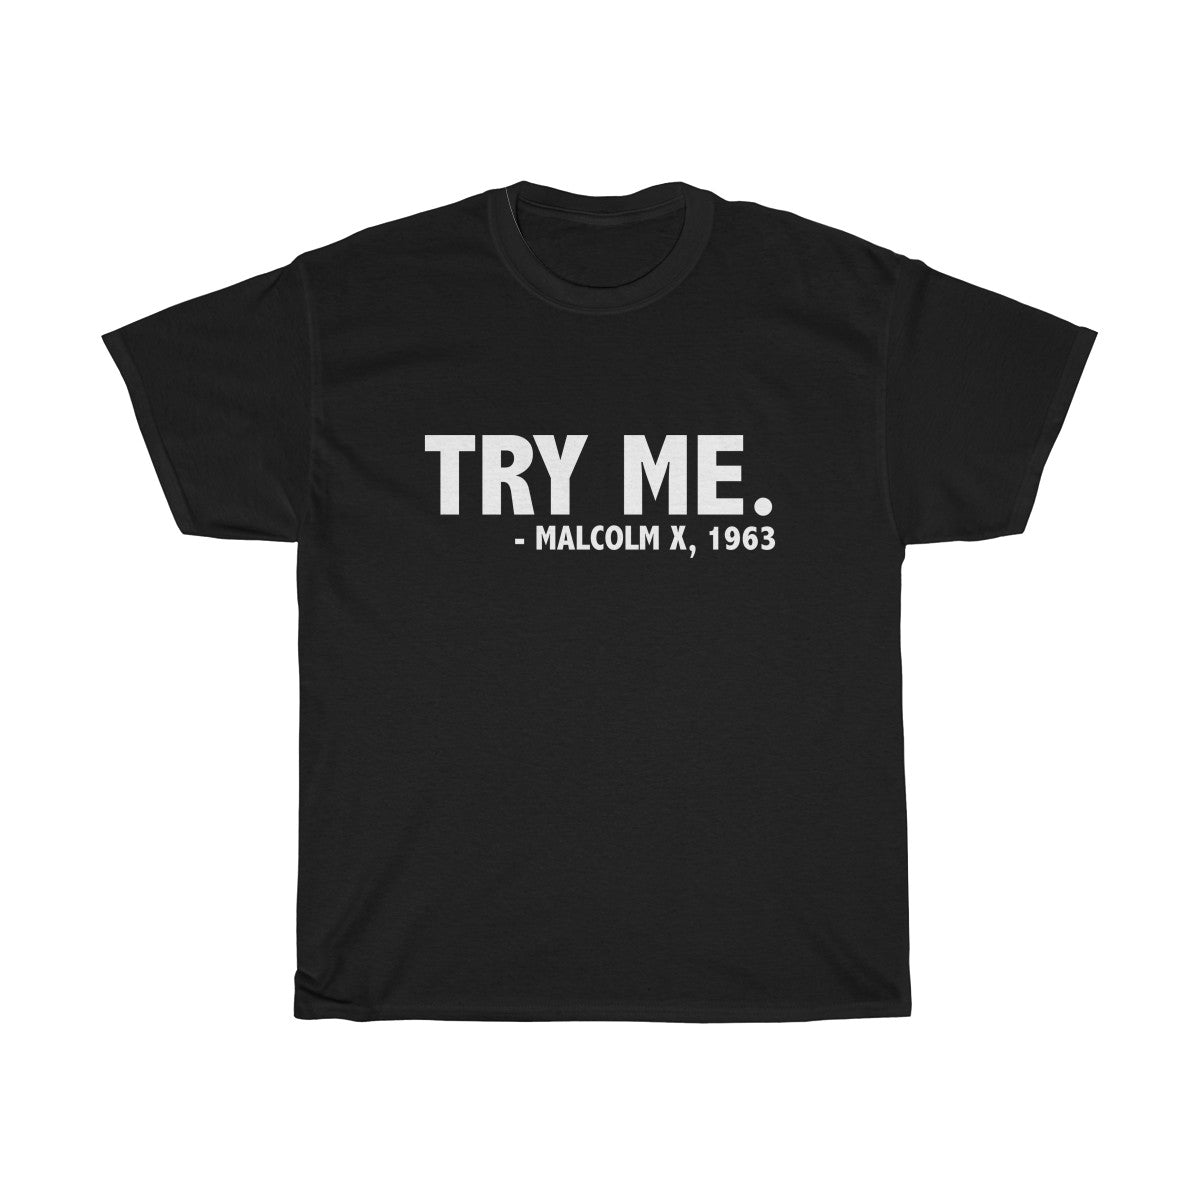 'Try Me' Unisex Graphic T-Shirt - Alpha Dawg Designs